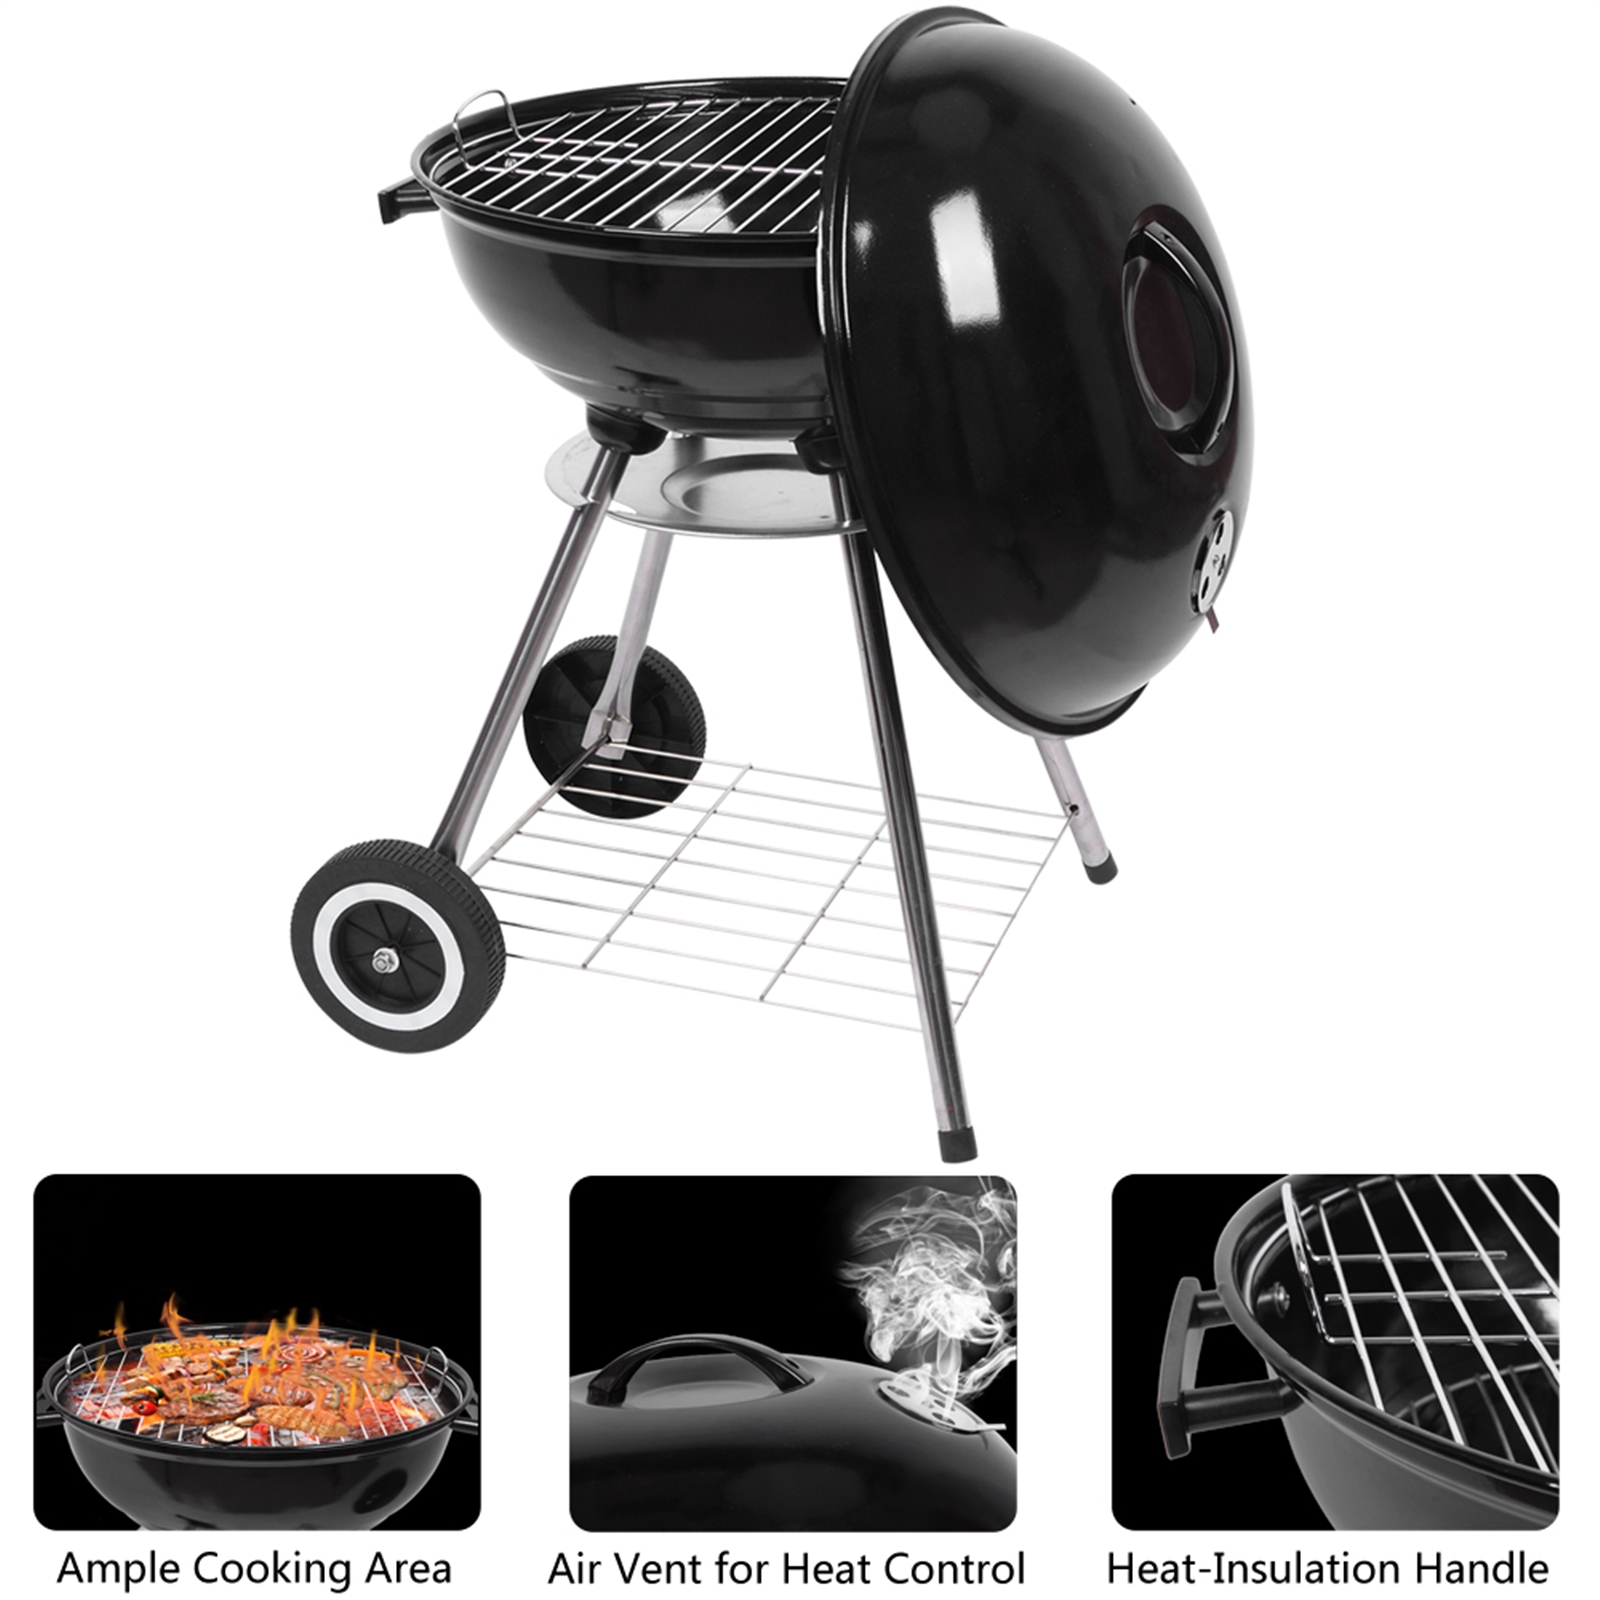 Goorabbit Portable Charcoal Barbecue Grill, 18" Portable BBQ Charcoal Grill with Bottom Shelf, Cooking Grate Grill w/ Metal Grate, Outdoor Charcoal Grill with 2 wheels for Patio, Picnic,Black - image 5 of 14